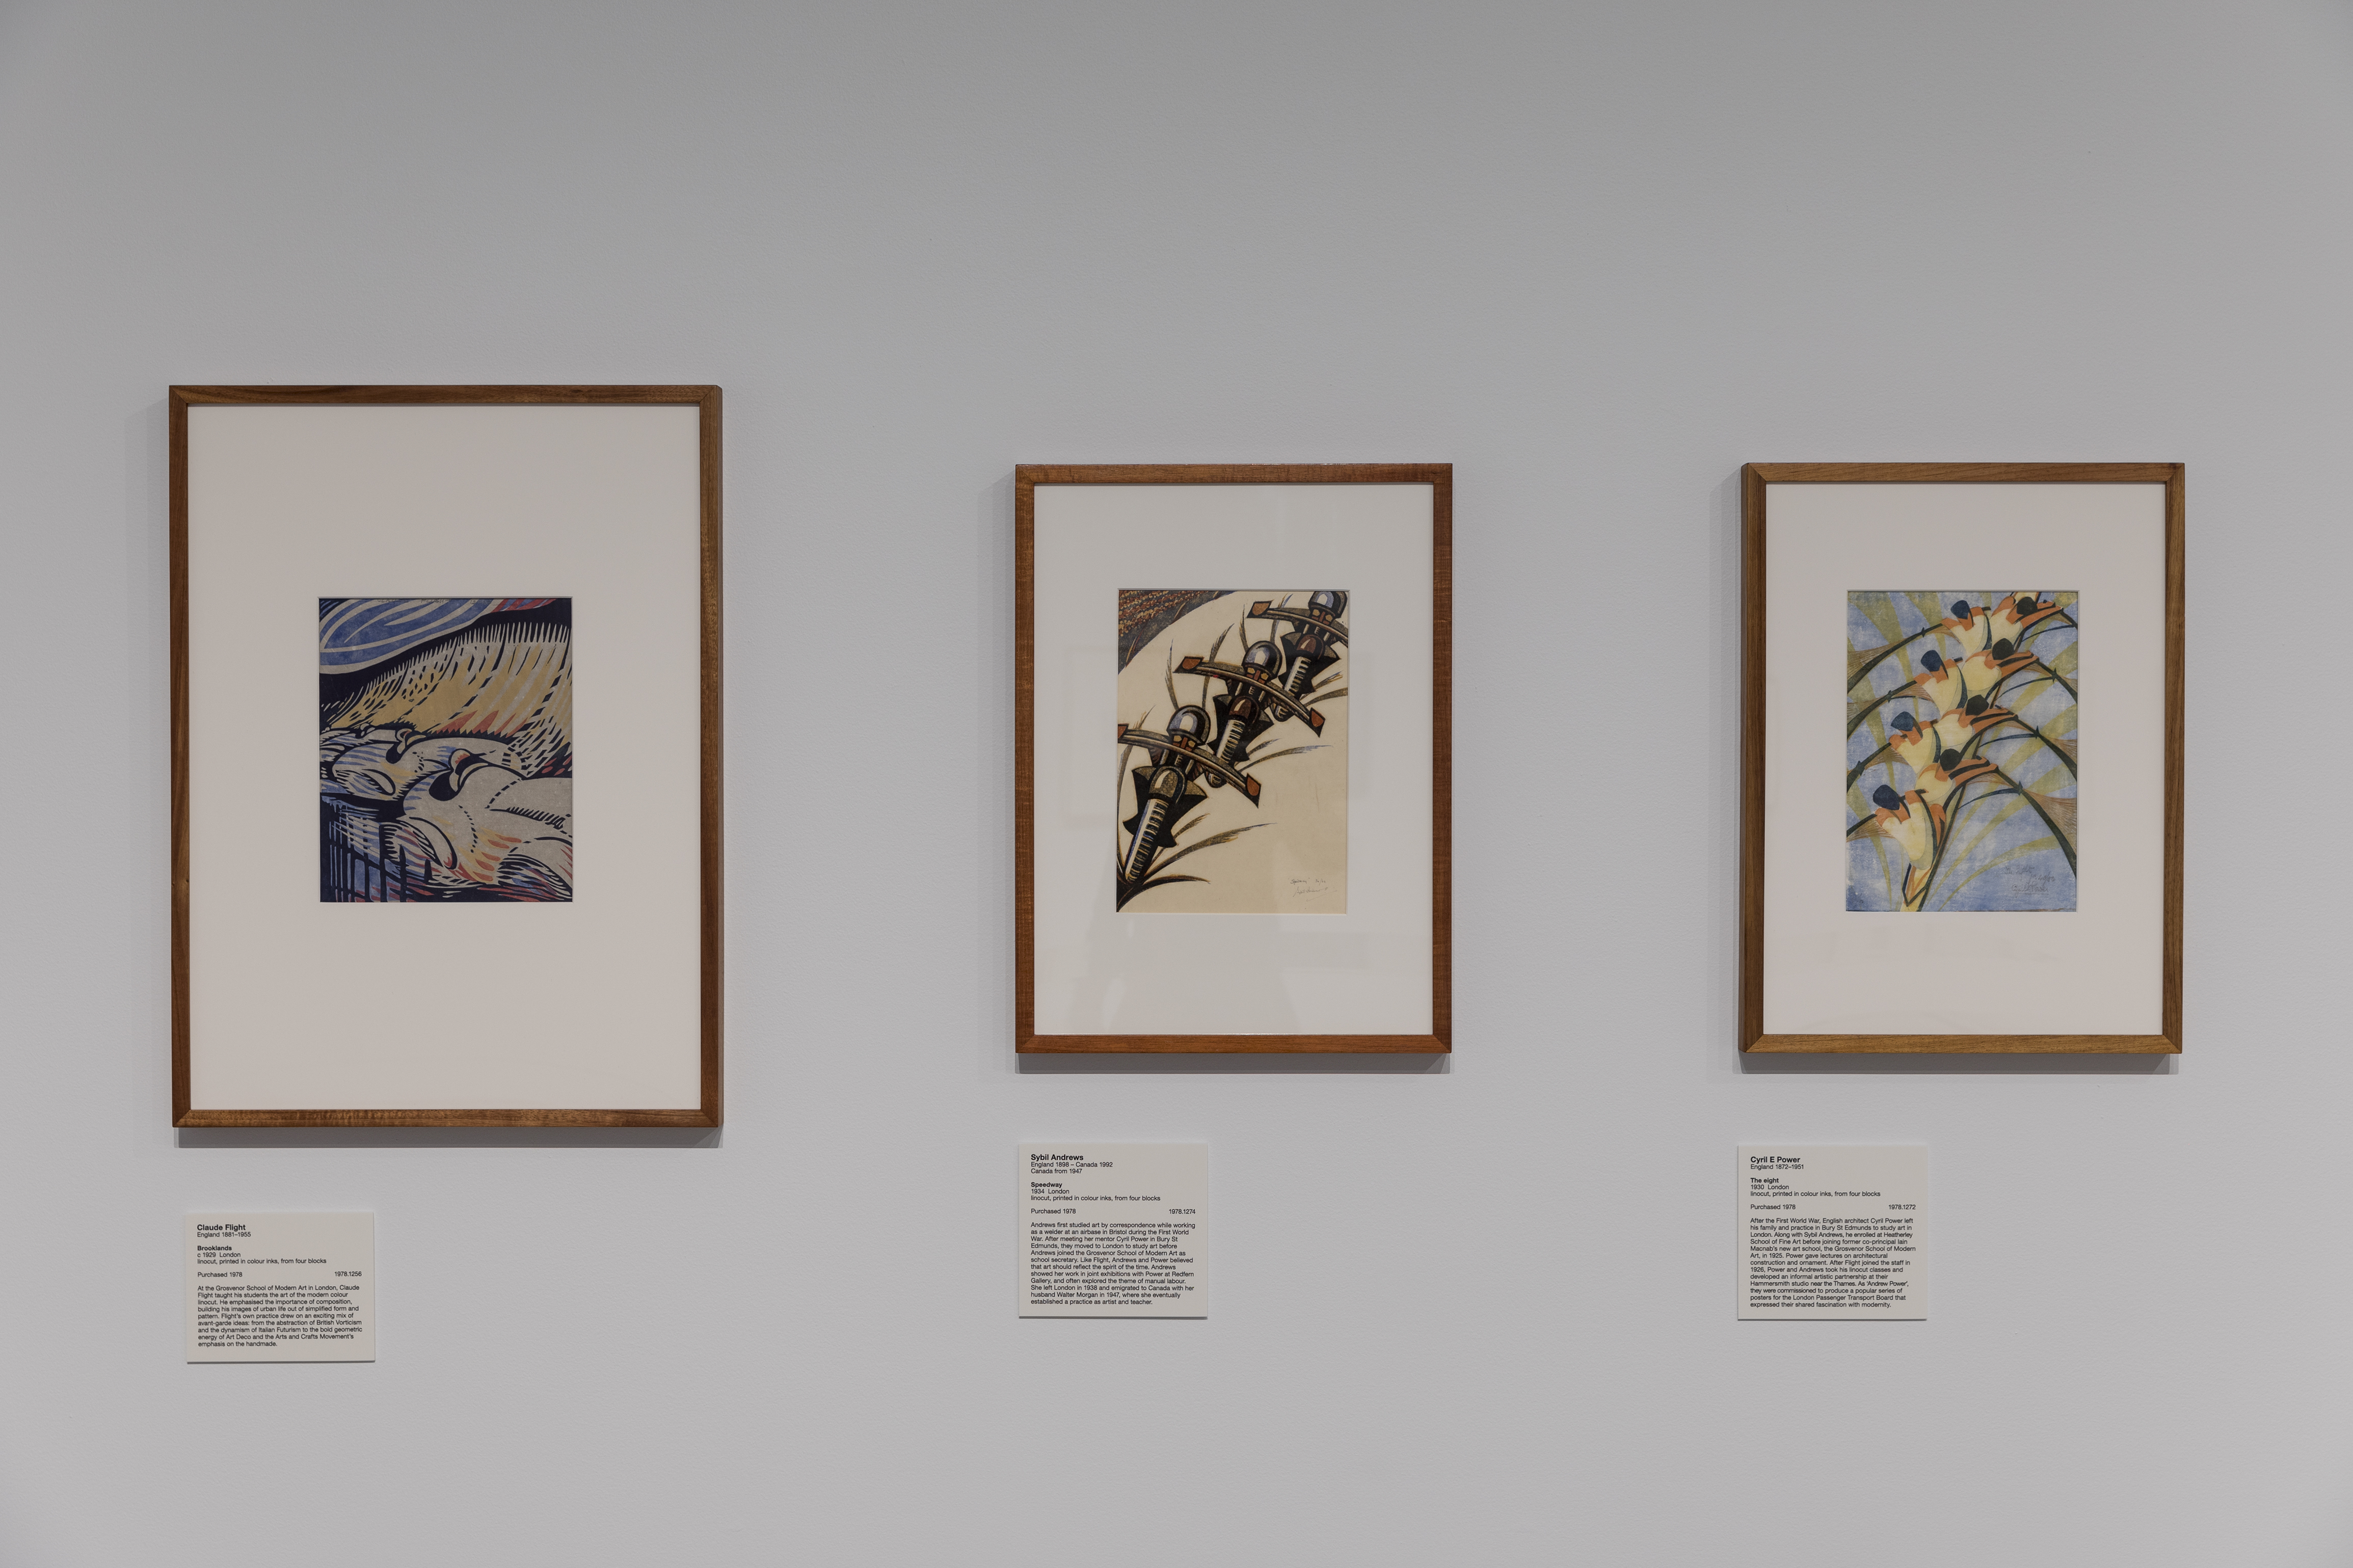 Artworks by Claude Flight (left), Sybil Andrews (centre) and Cyril Power (right) in <em>Spowers &amp; Syme</em>, installation view. Courtesy of Geelong Art Gallery. Photographer: Andrew Curtis